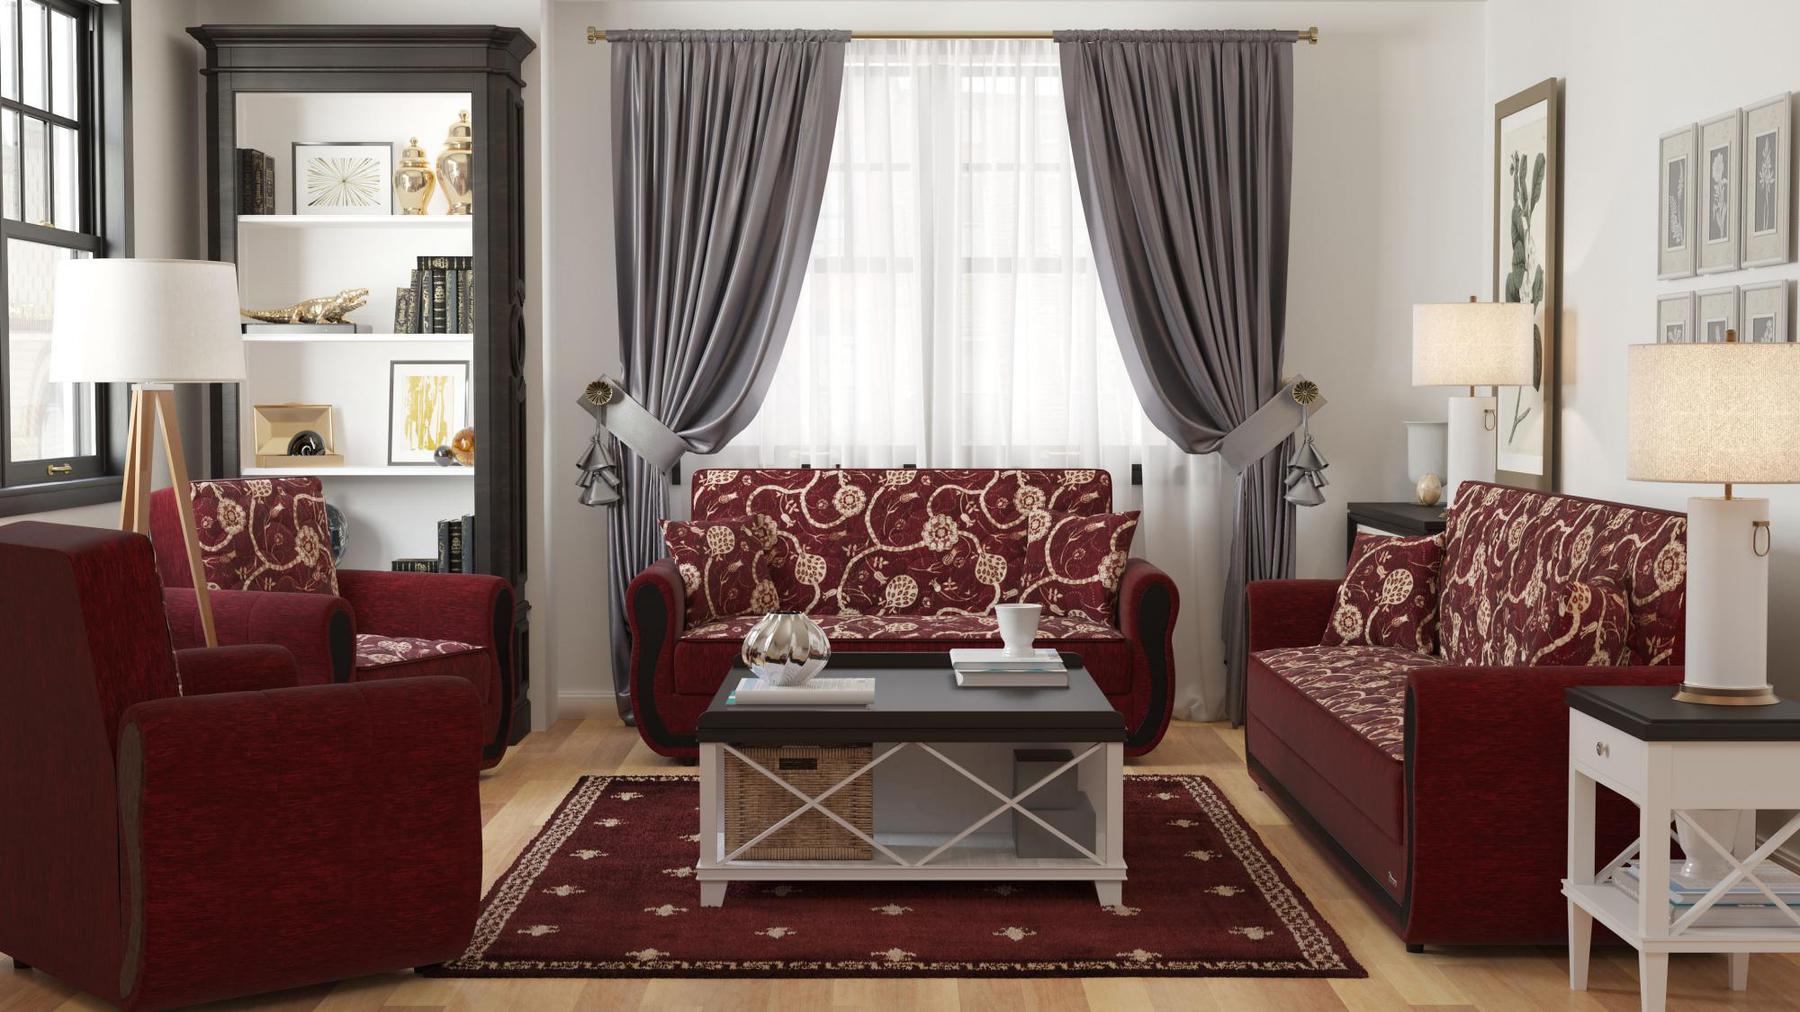 Modern design, Burgundy , Chenille upholstered convertible sleeper Loveseat with underseat storage from Victoria Urban by Ottomanson in living room lifestyle setting with the matching furniture set. This Loveseat measures 70 inches width by 28 inches depth by 38 inches height.